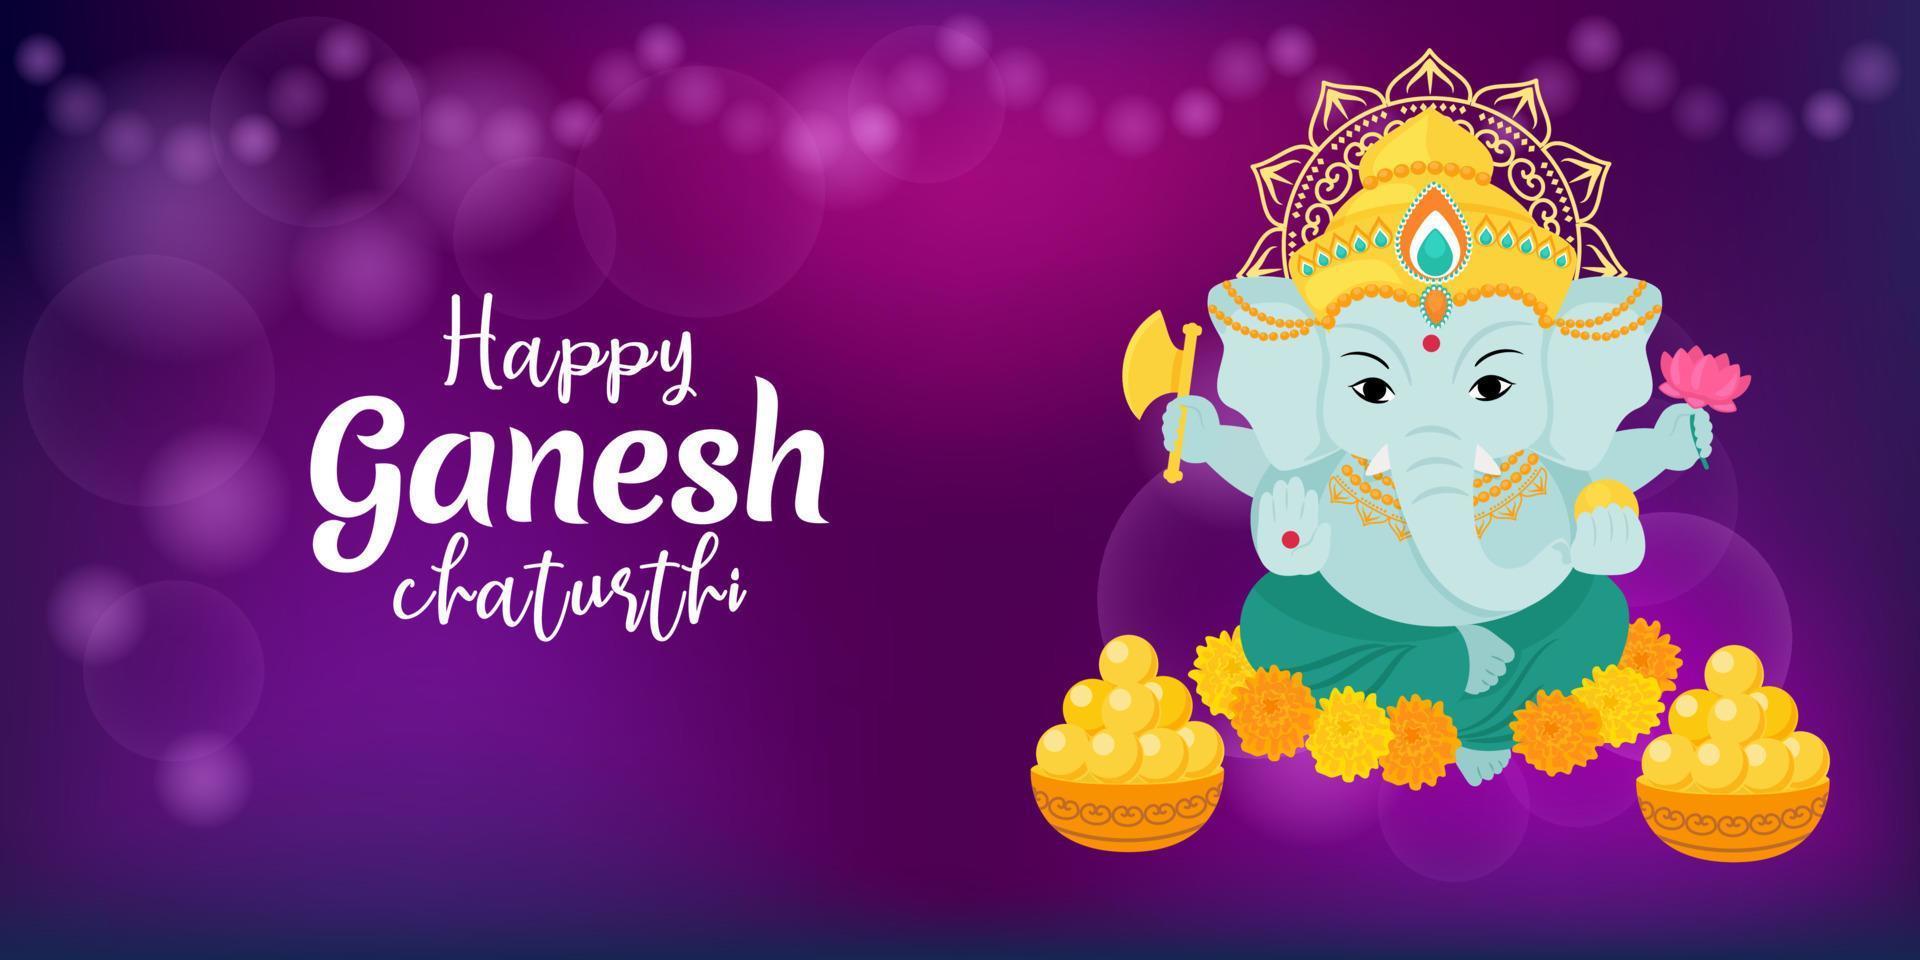 Happy Ganesh Chaturthi greetings. Design for holiday banner or poster. Traditional Indian festivals. Vector illustration.